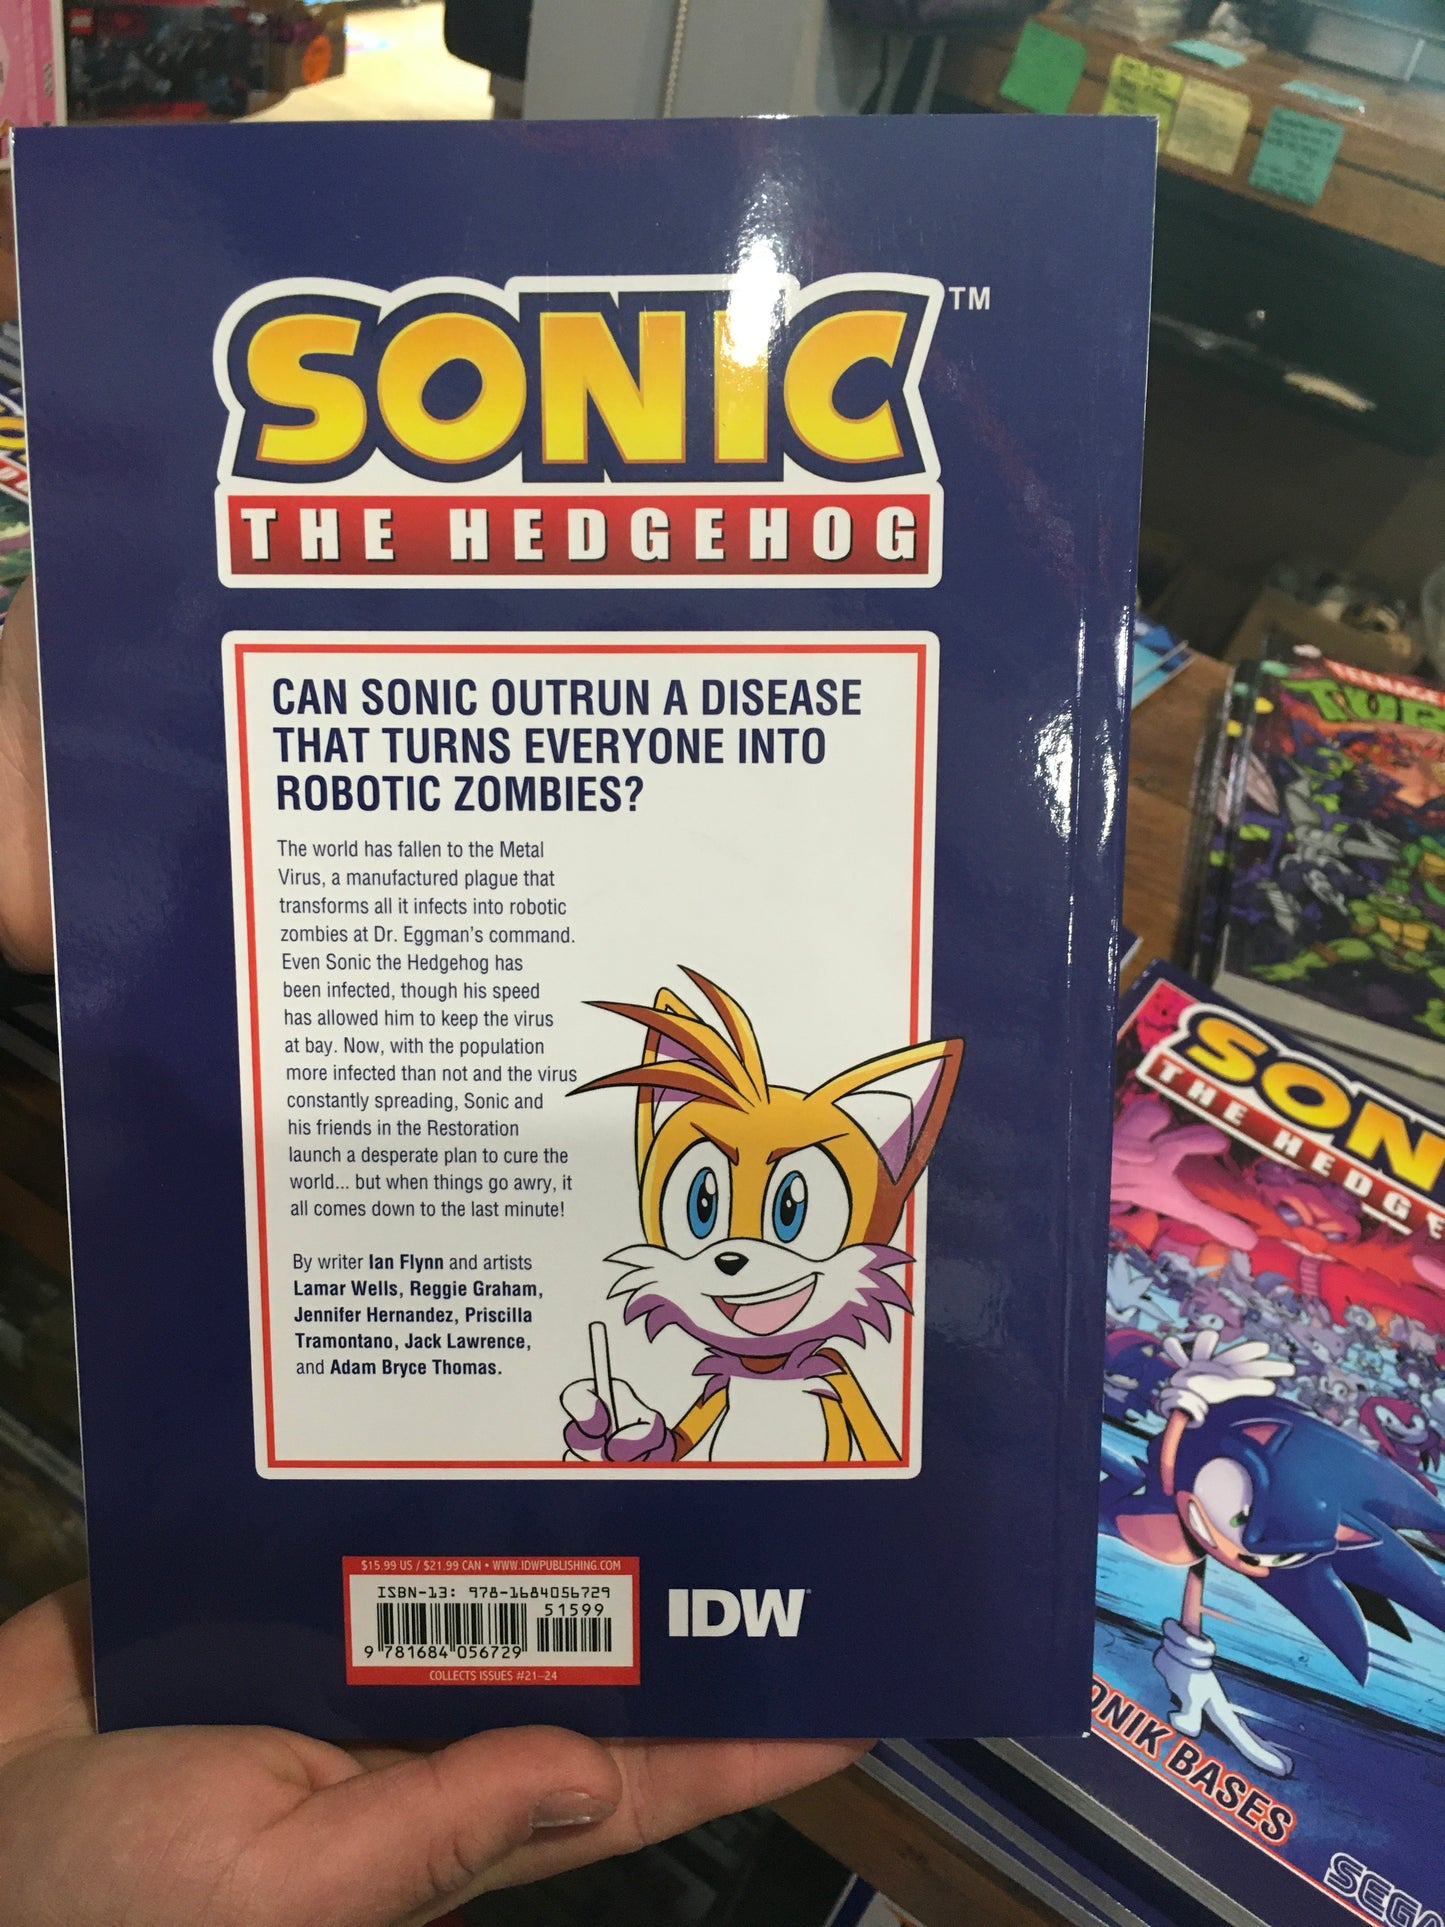 Sonic the Hedgehog vol. 6 The Last Minute